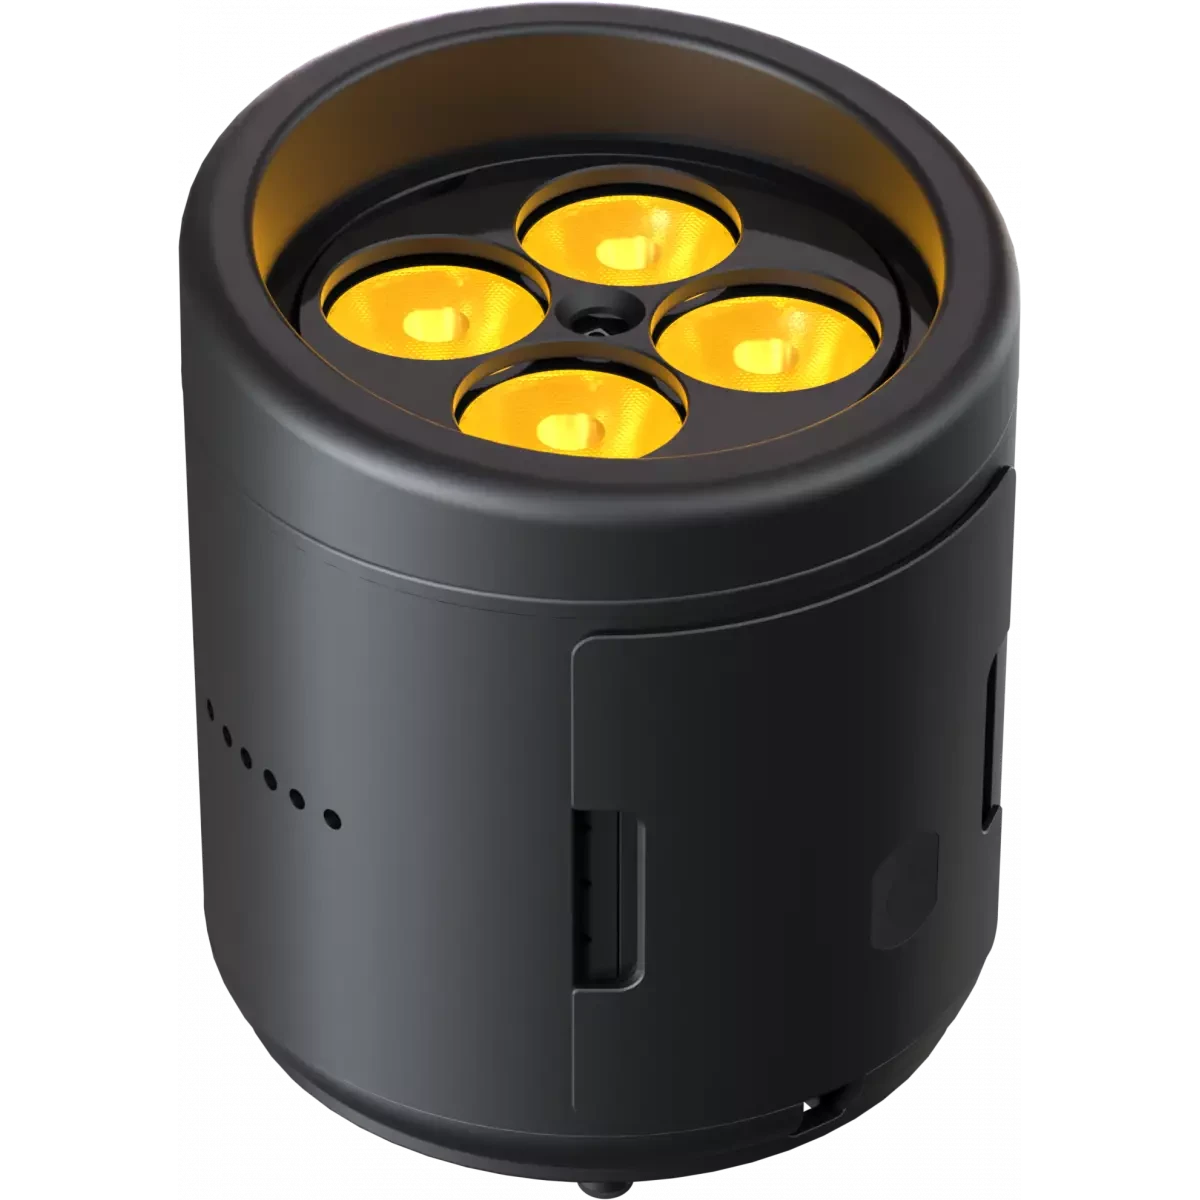 Take a look at the IP65 rated Smart BatPlusG2 from PROLIGHTS…